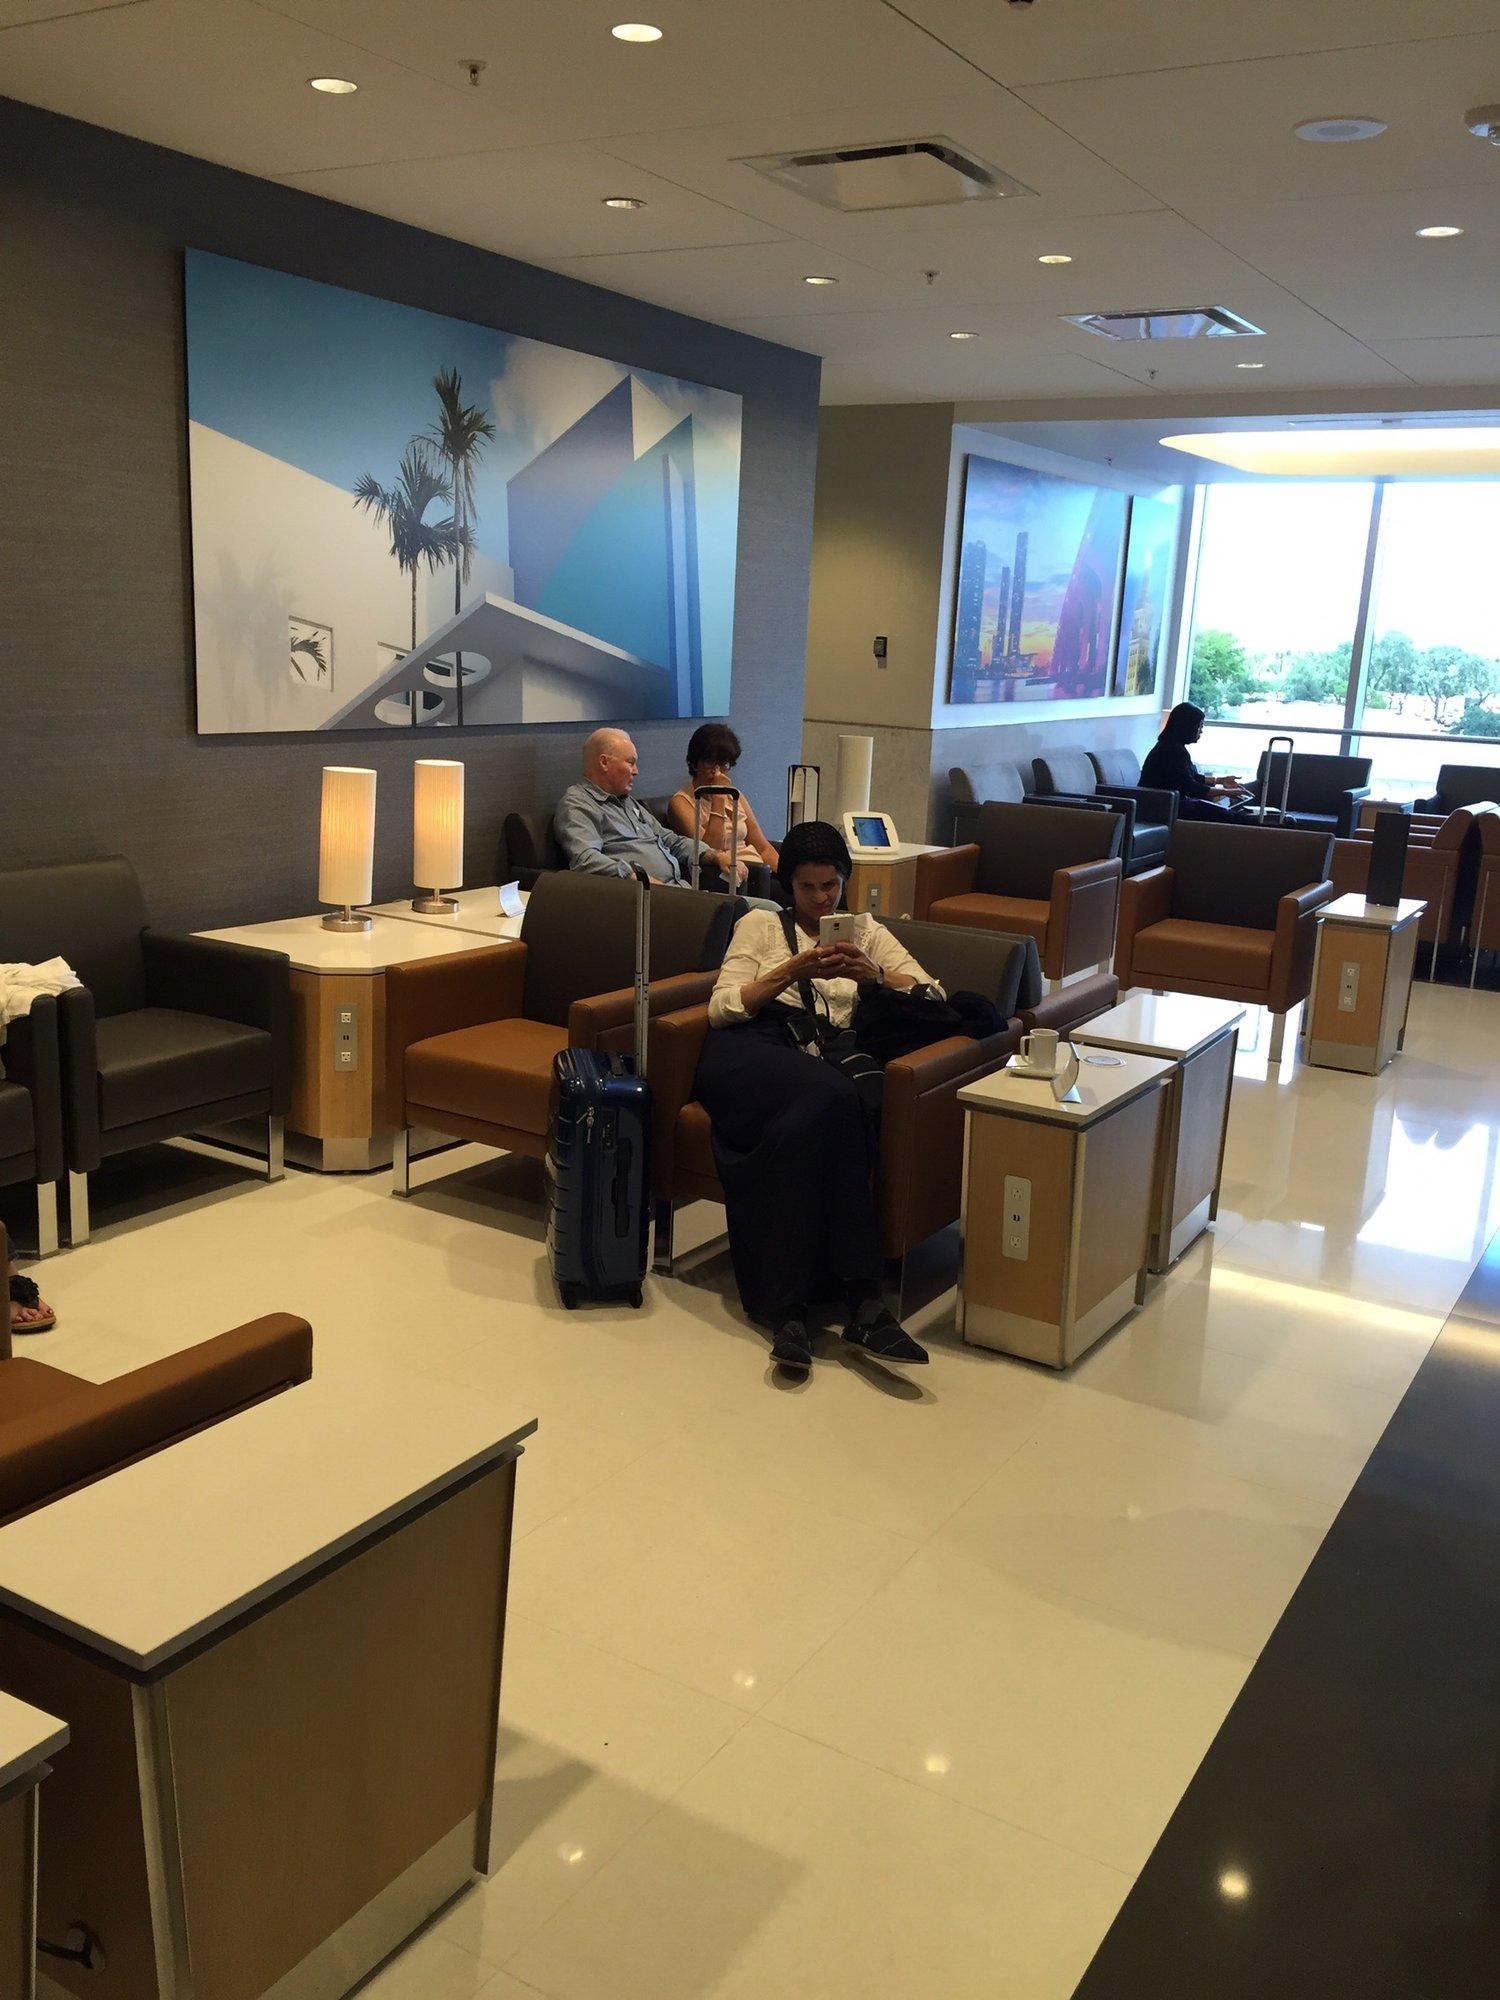 American Airlines Admirals Club (Gate D15) image 12 of 25